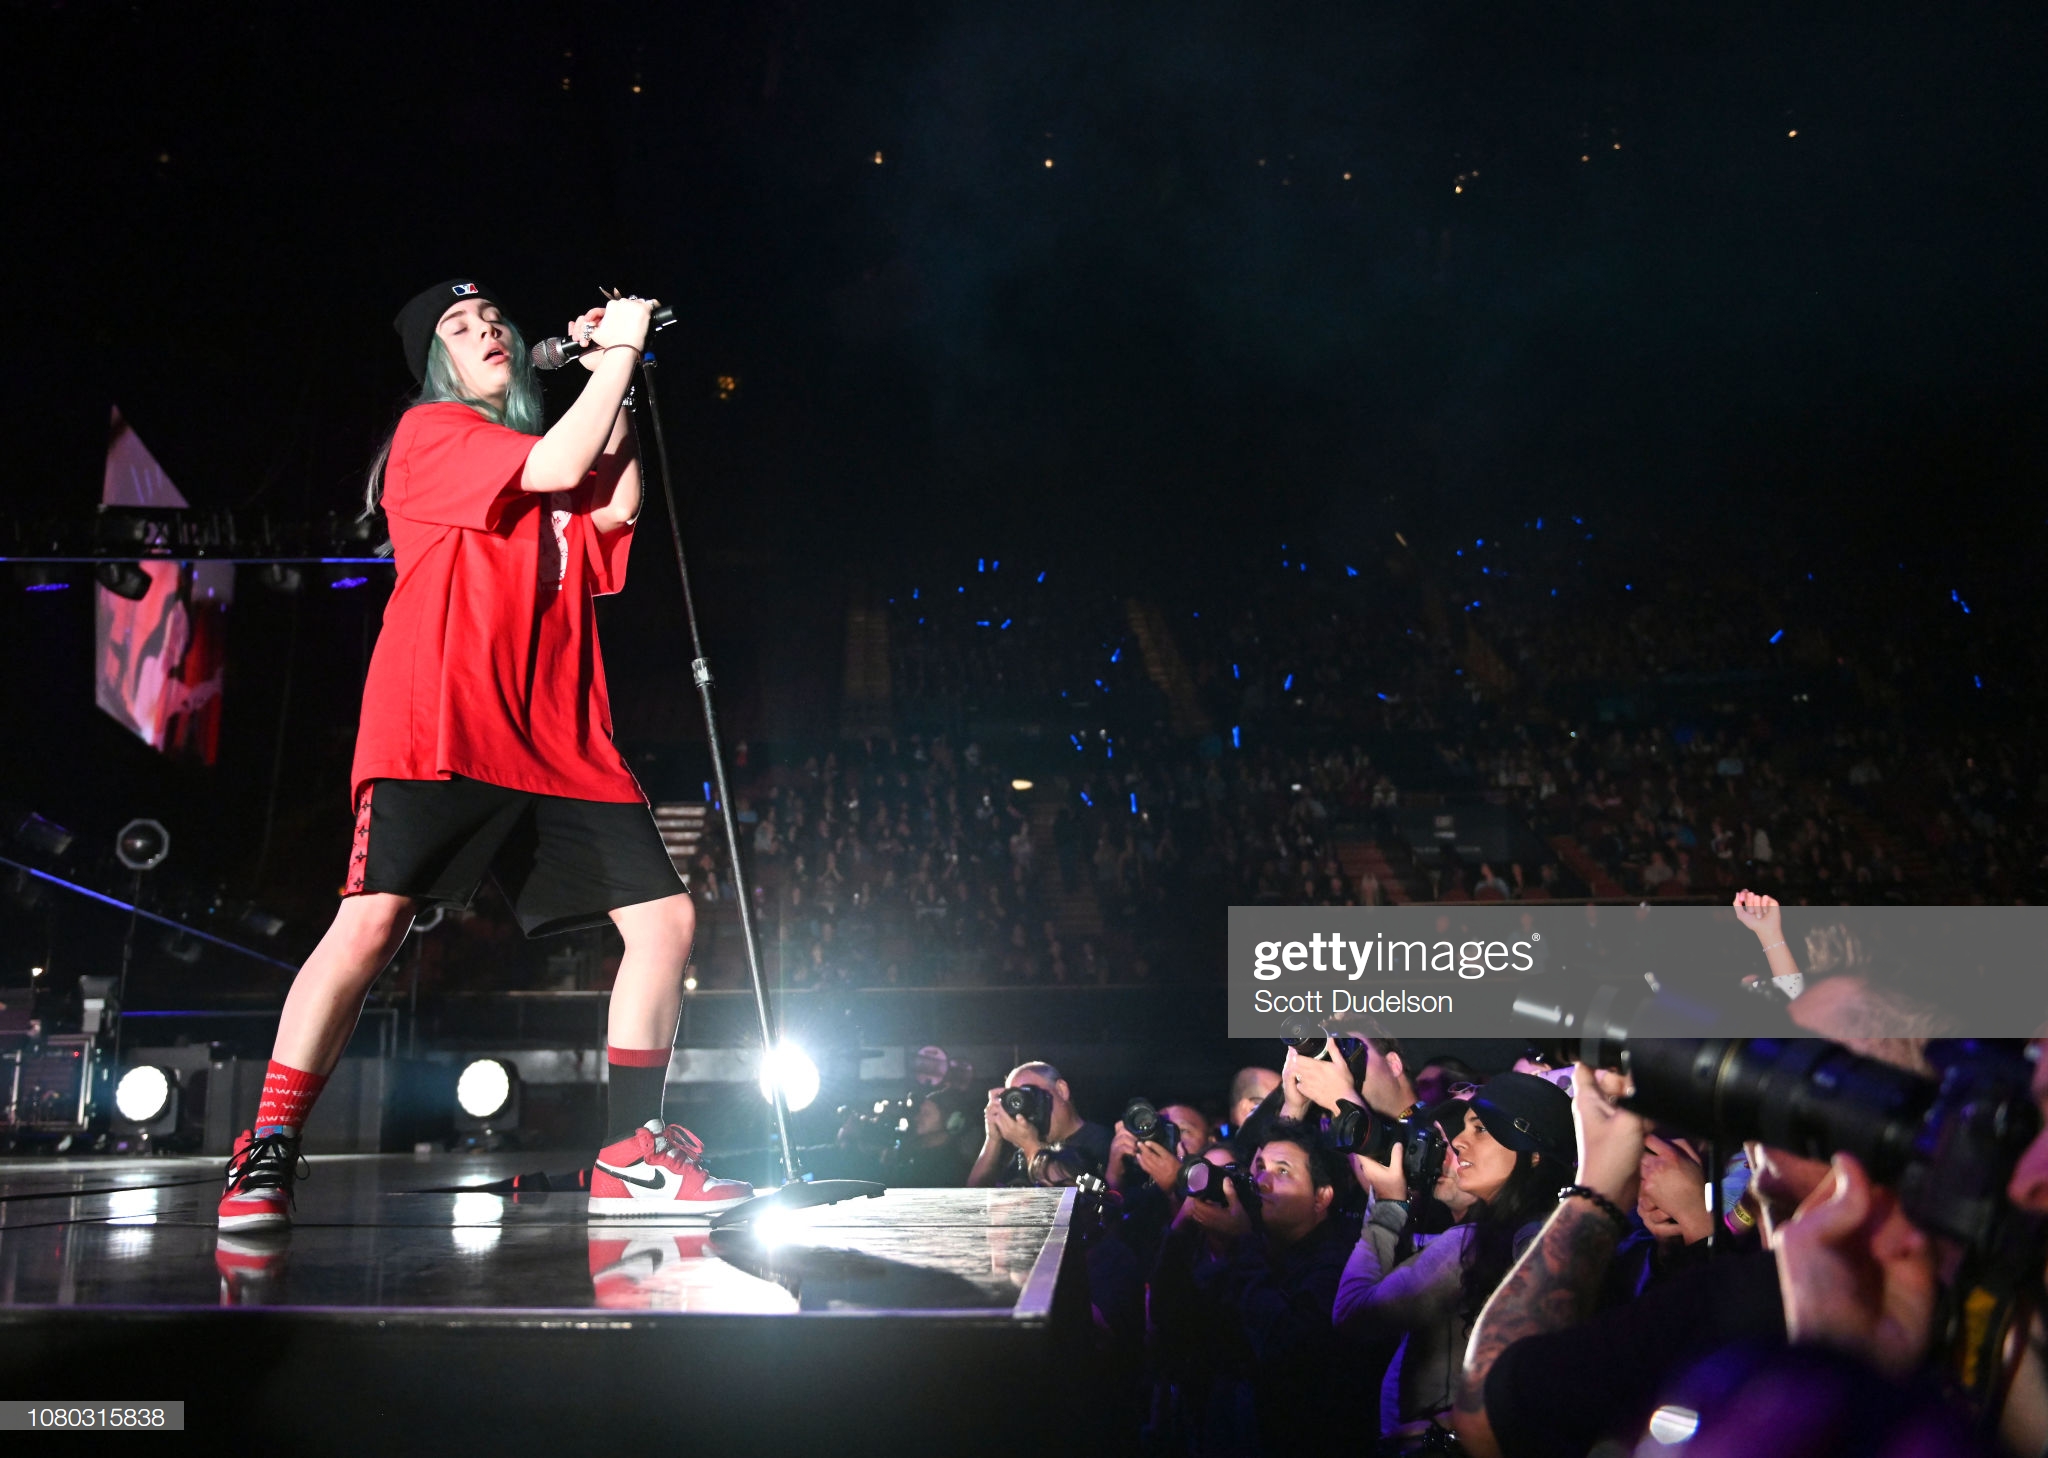 gettyimages-1080315838-2048x2048.jpg